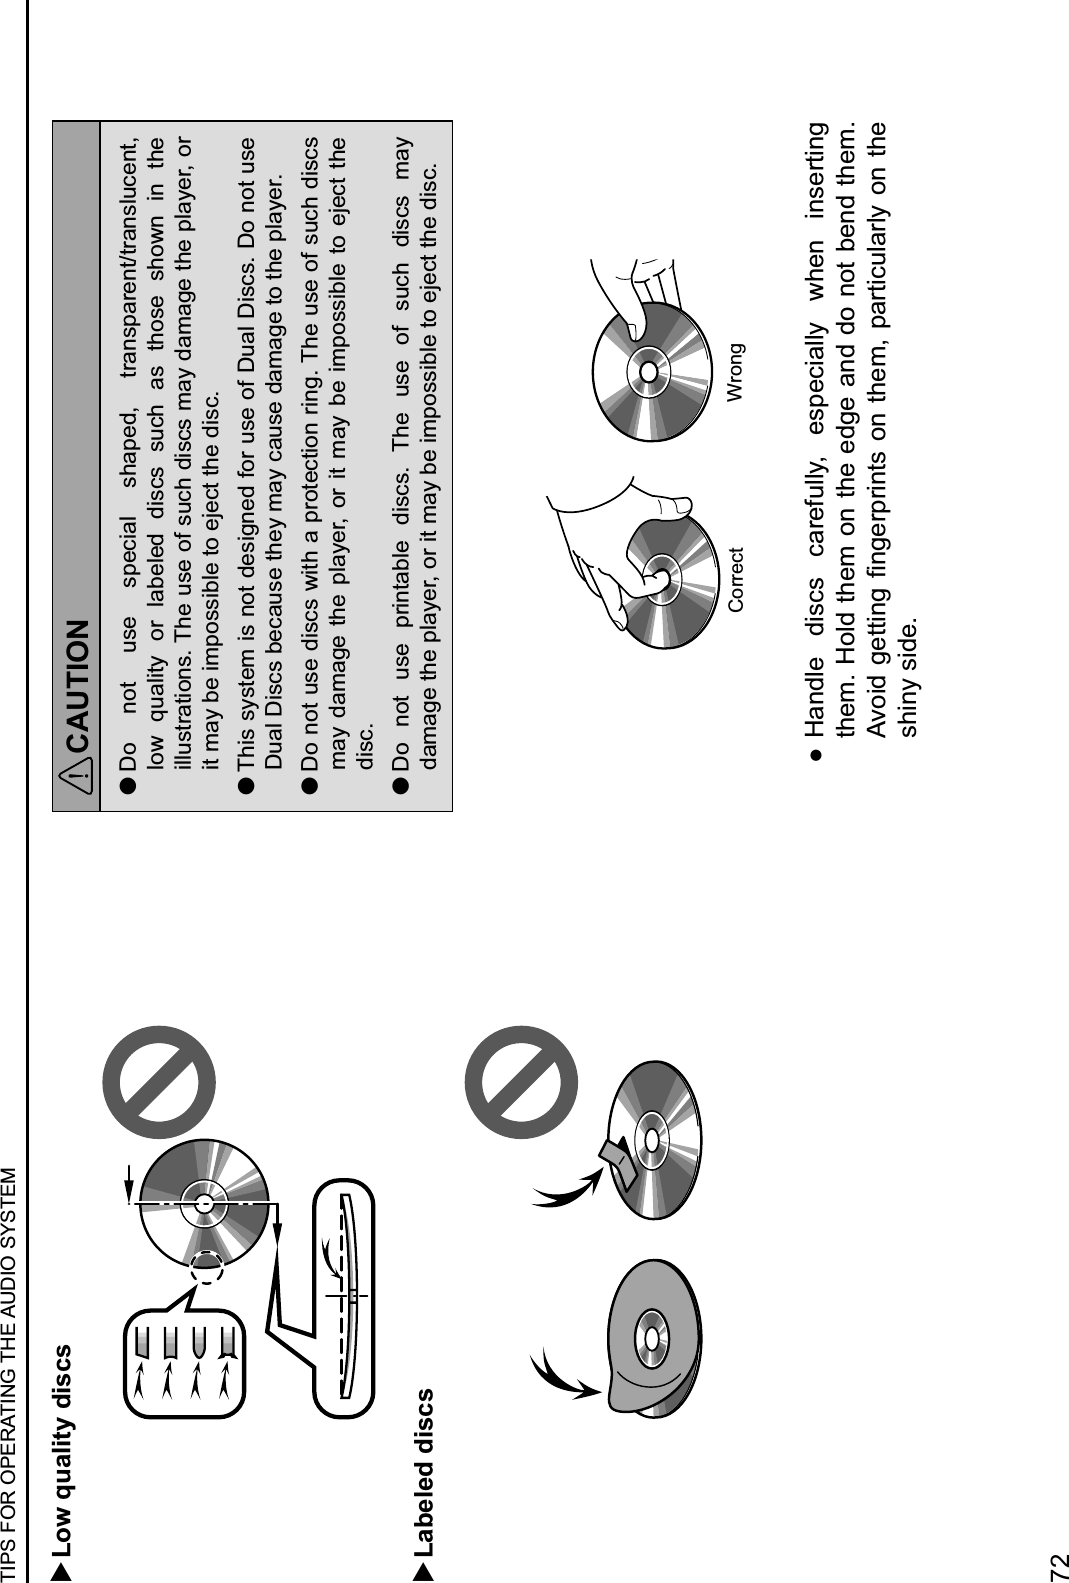   Low quality discs  Labeled discsCAUTION lDo  not  use  special  shaped,  transparent/translucent, low  quality  or  labeled  discs  such  as  those  shown  in  the illustrations. The use of such discs may damage the player, or it may be impossible to eject the disc. lThis system is not designed for use of Dual Discs. Do not use Dual Discs because they may cause damage to the player. lDo not use discs with a protection ring. The use of such discs may damage  the  player, or  it may  be impossible  to  eject  the disc. lDo  not  use  printable  discs.  The  use  of  such  discs  may damage the player, or it may be impossible to eject the disc.Correct Wrong :Handle  discs  carefully,  especially  when  inserting them. Hold them on the edge and do not bend them. WM(&amp;)$7&quot;,,&amp;#7$3#7&quot;606&amp;#,*$(#$,!&quot;2-$0%6,&amp;+/1%61.$(#$,!&quot;$shiny side.TIPS FOR OPERATING THE AUDIO SYSTEM72